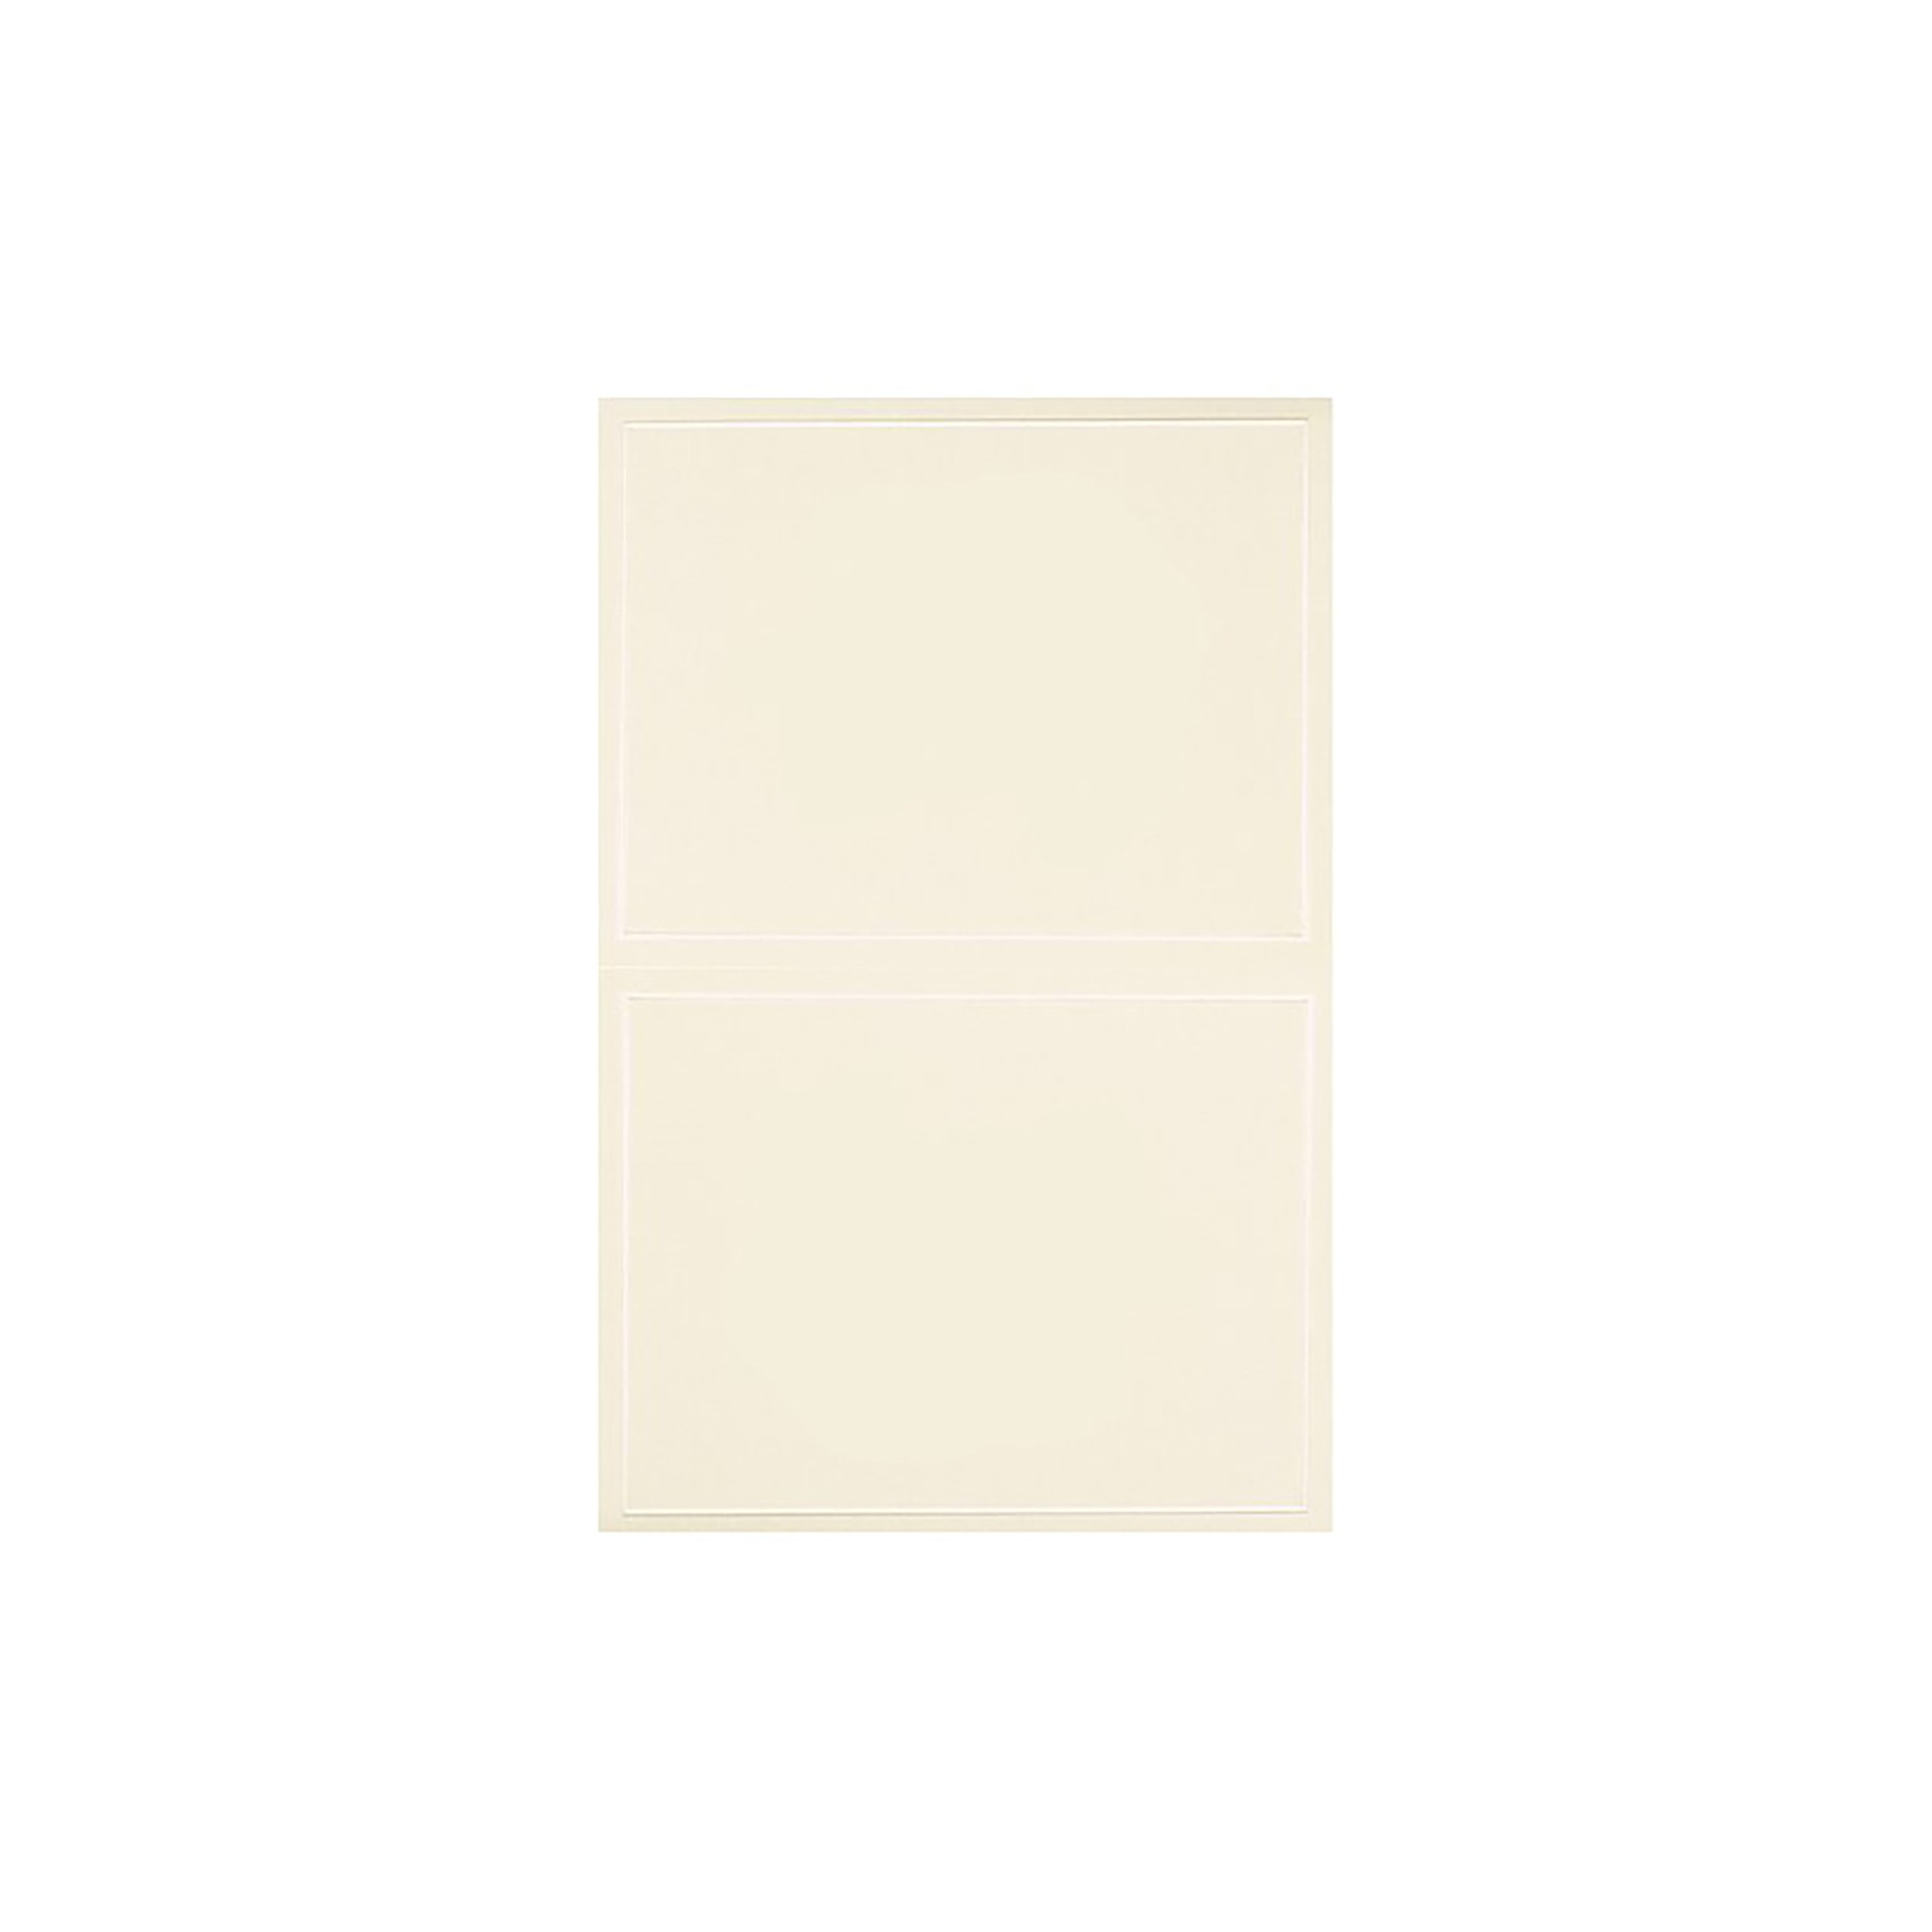 Blank All Occasions Greeting Cards with Envelopes (50ct) - Ivory